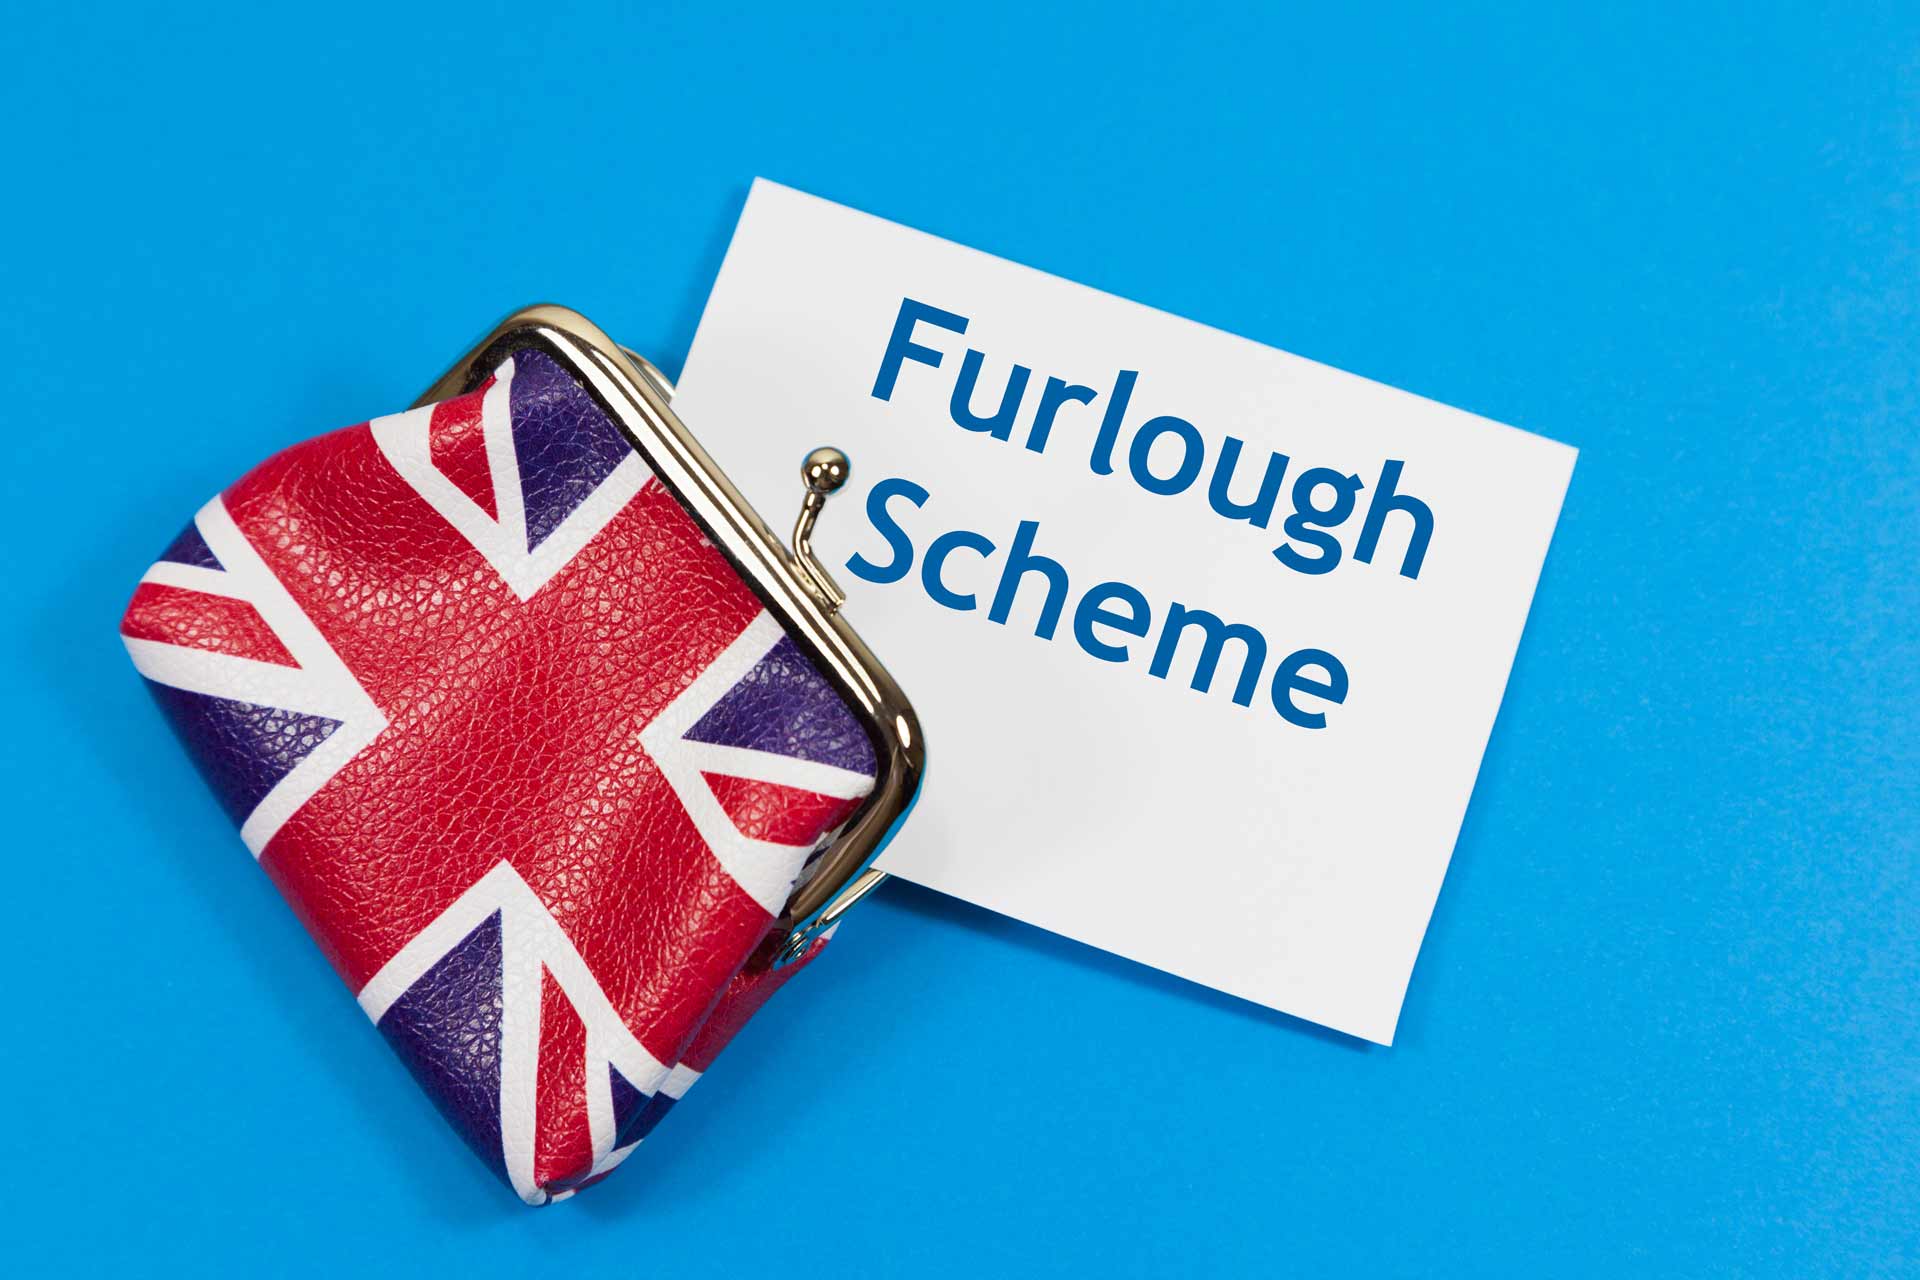 HMRC gives employers 30 days to come clean over furlough support claims